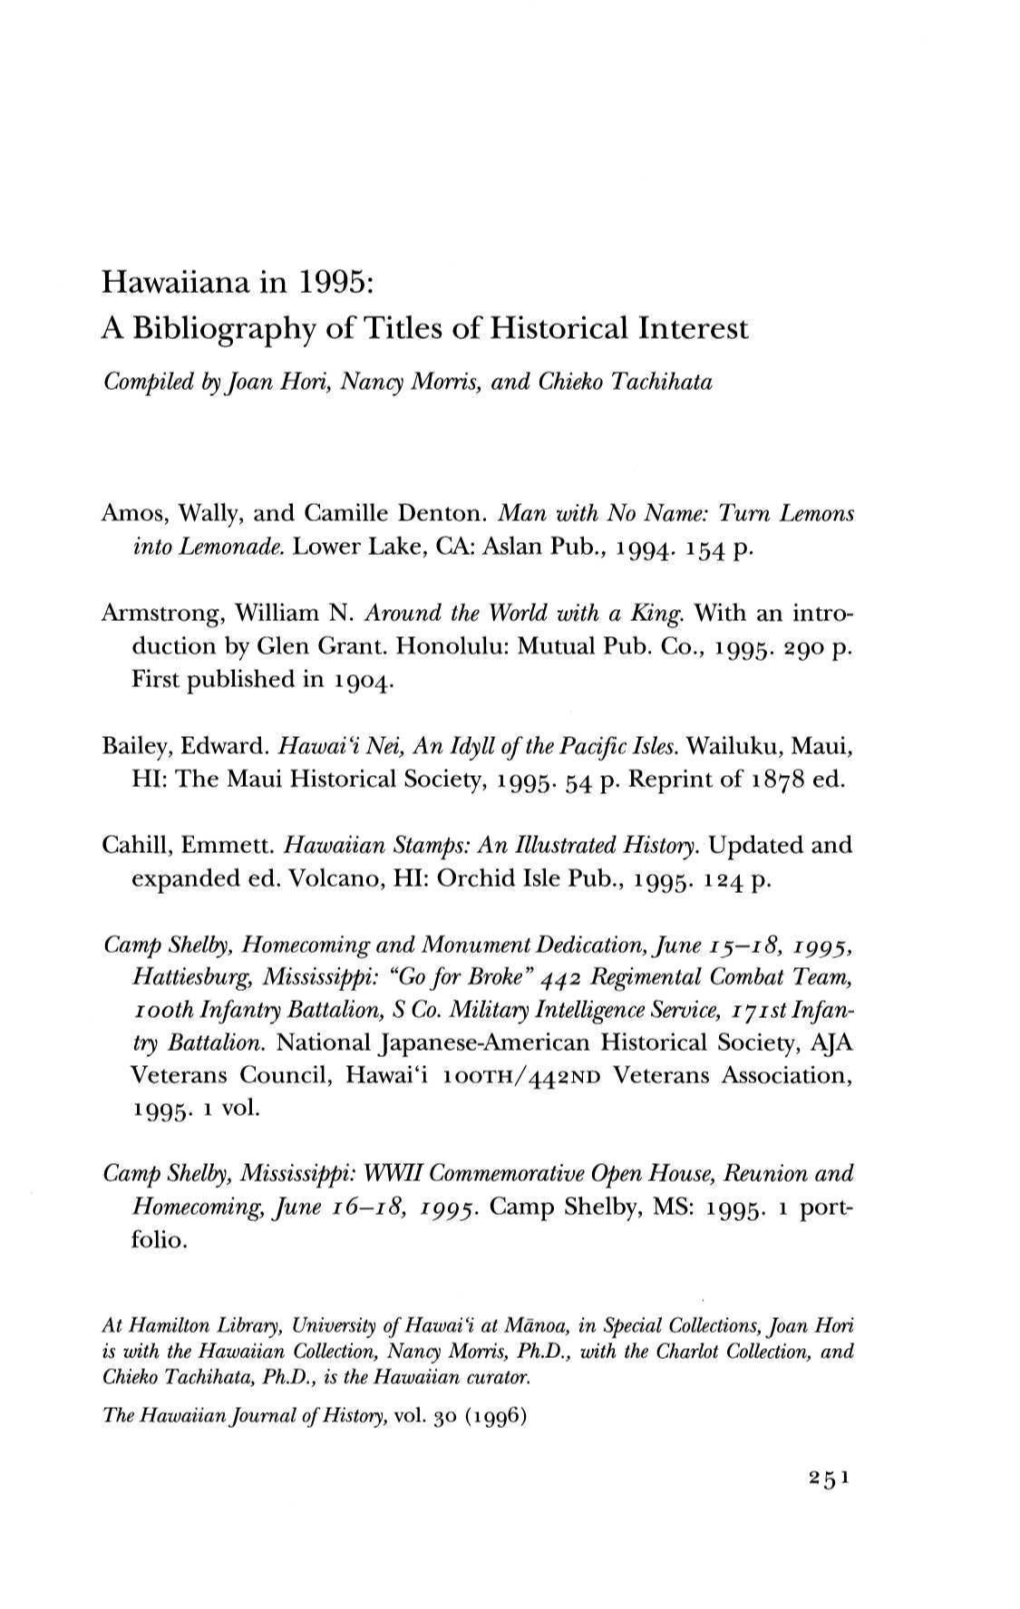 Hawaiiana in 1995: a Bibliography of Titles of Historical Interest Compiled by Joan Hori, Nancy Morris, and Chieko Tachihata